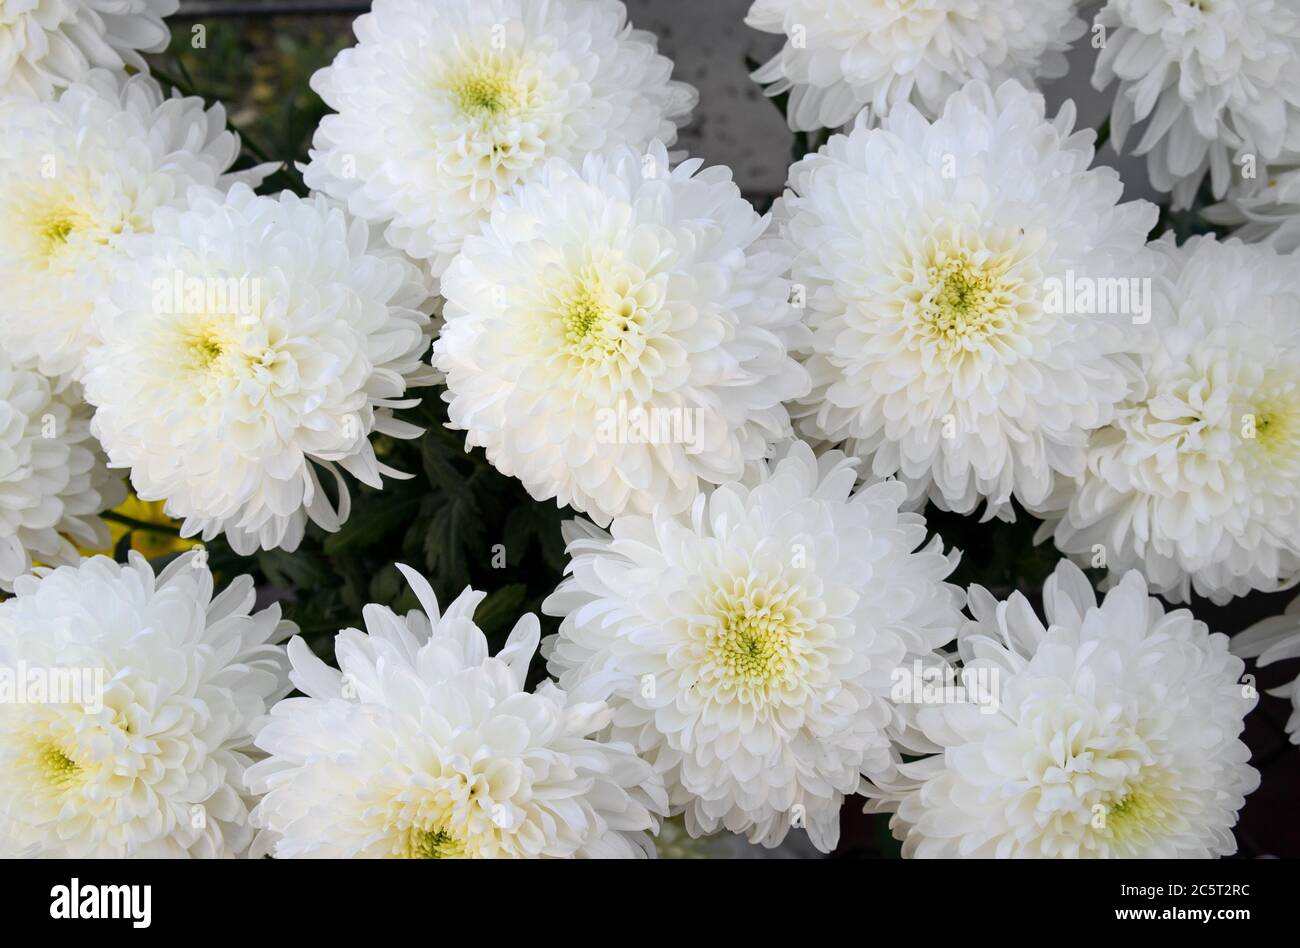 Background closeup of unwrapped white chrysanthemums flowers Stock Photo